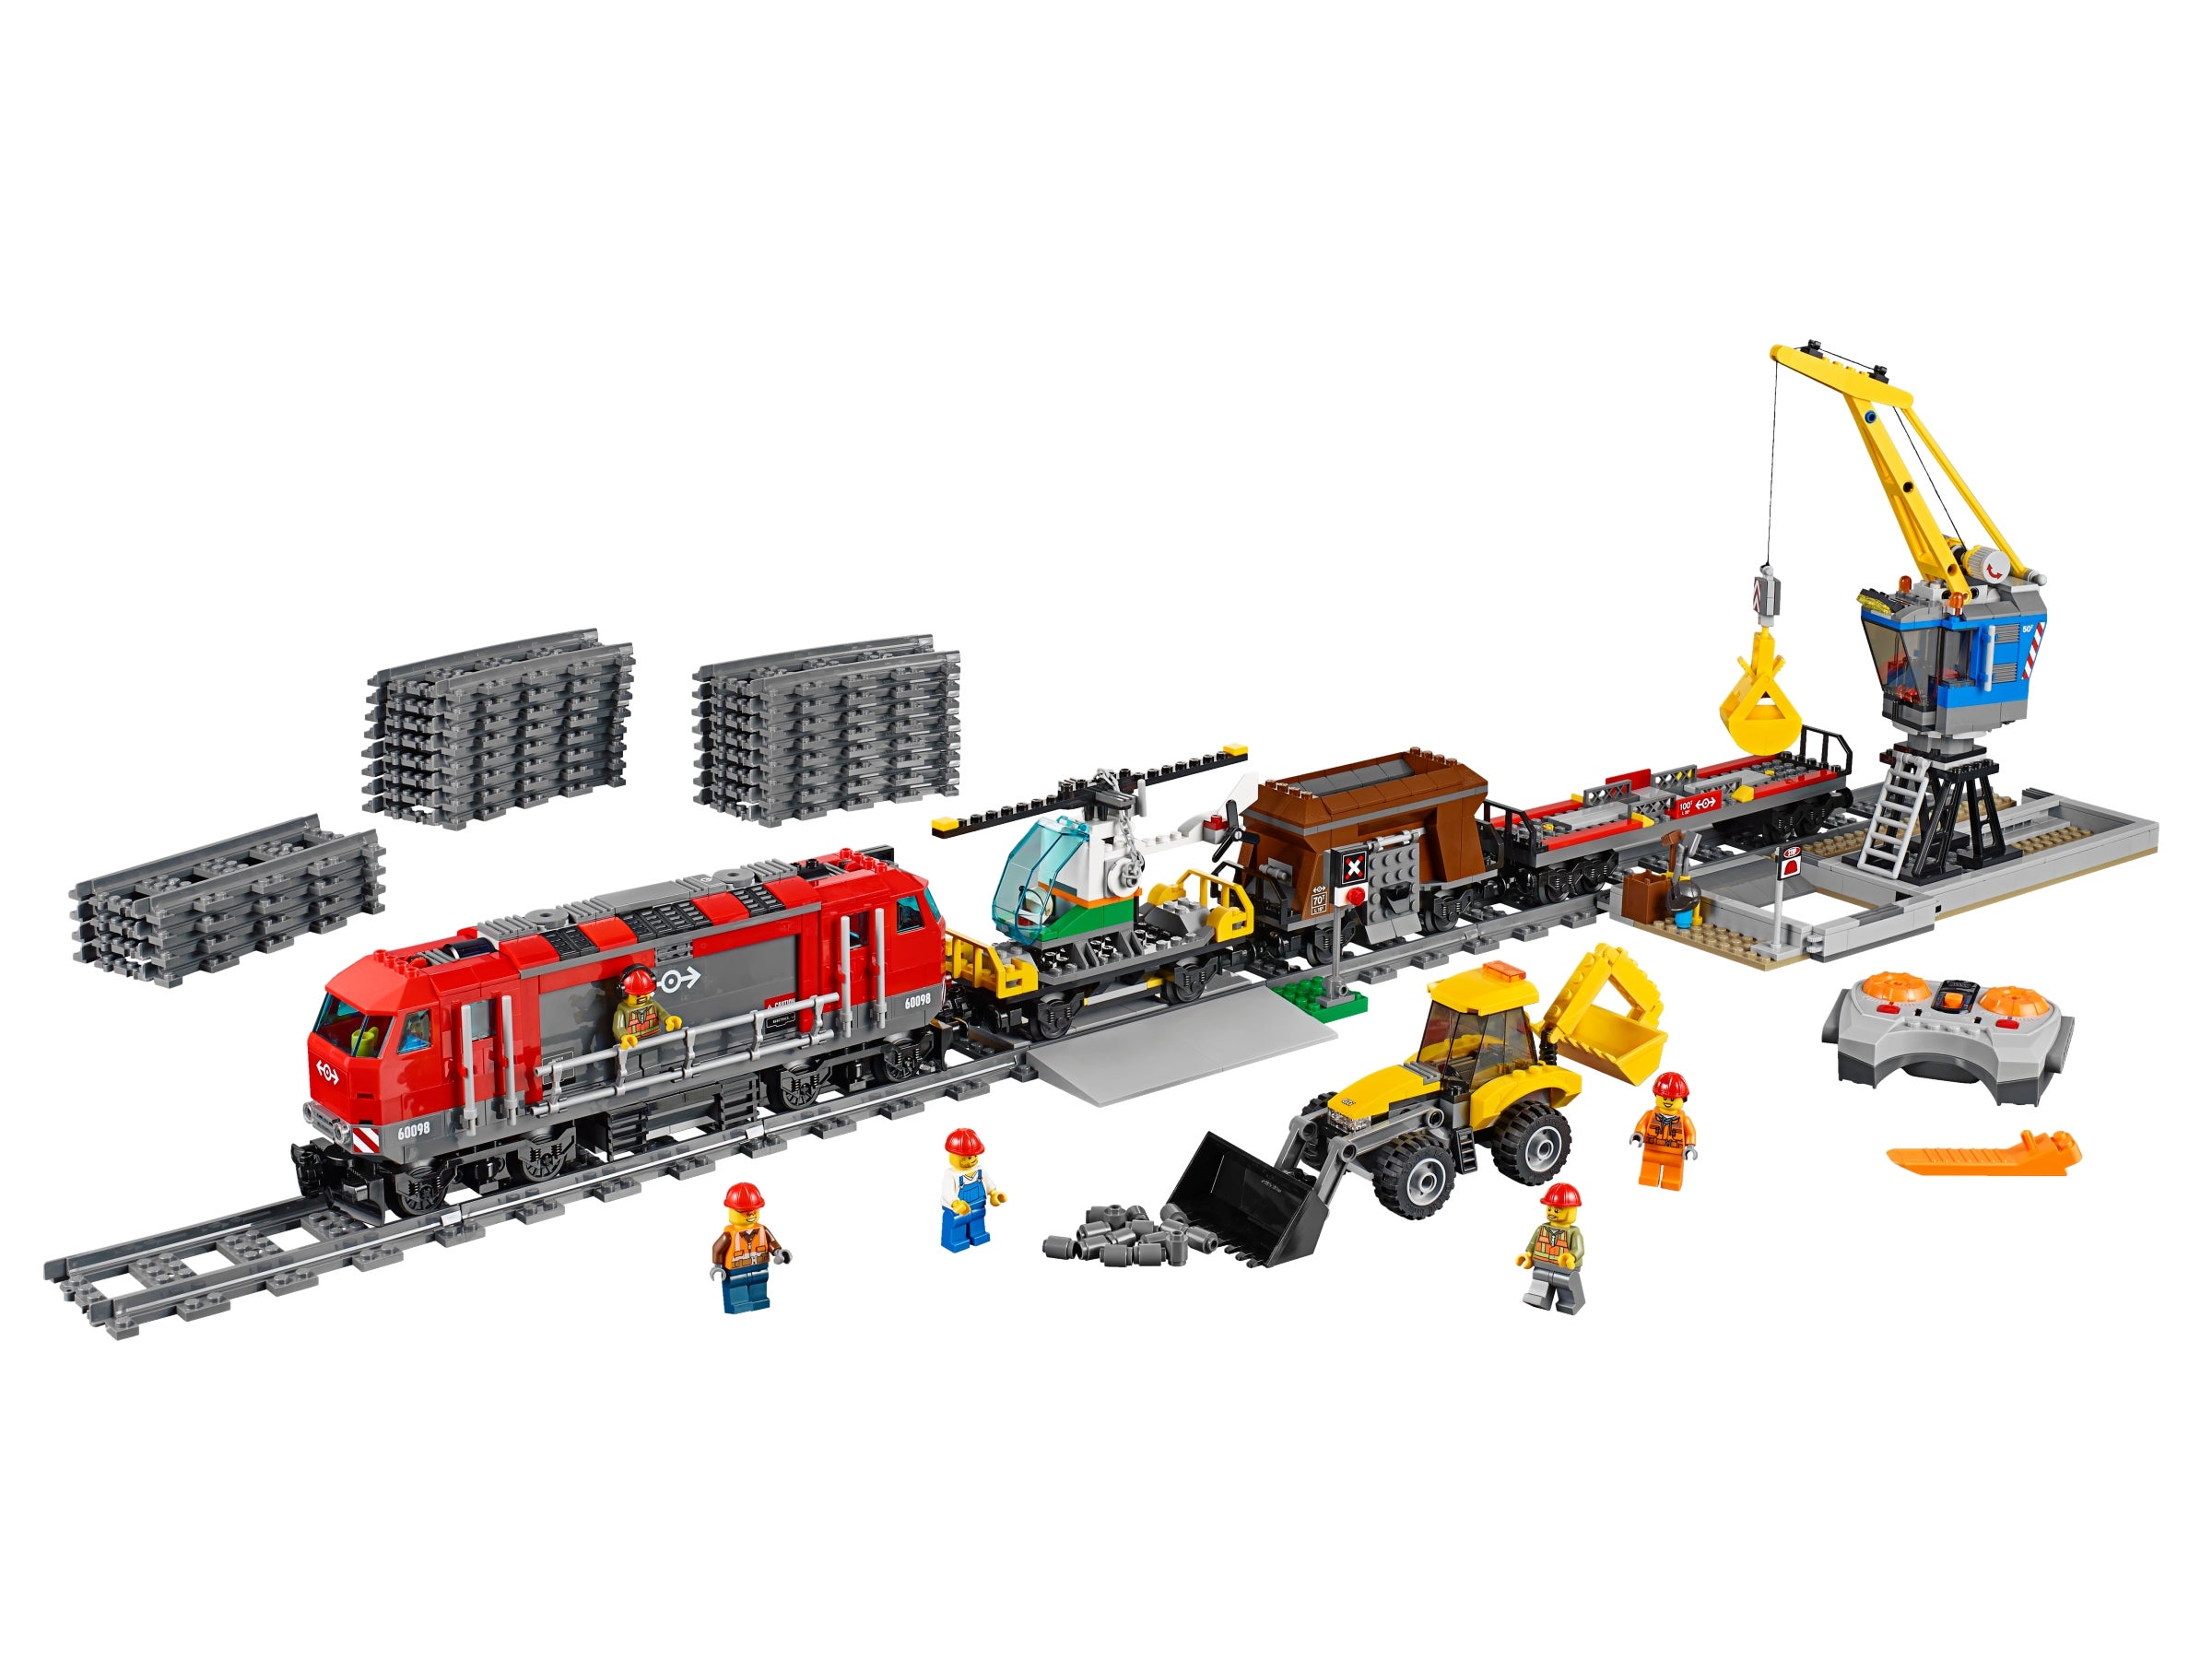 Figurine Minifig chantier construction worker rail cty555 60076 60098 NEW Lego